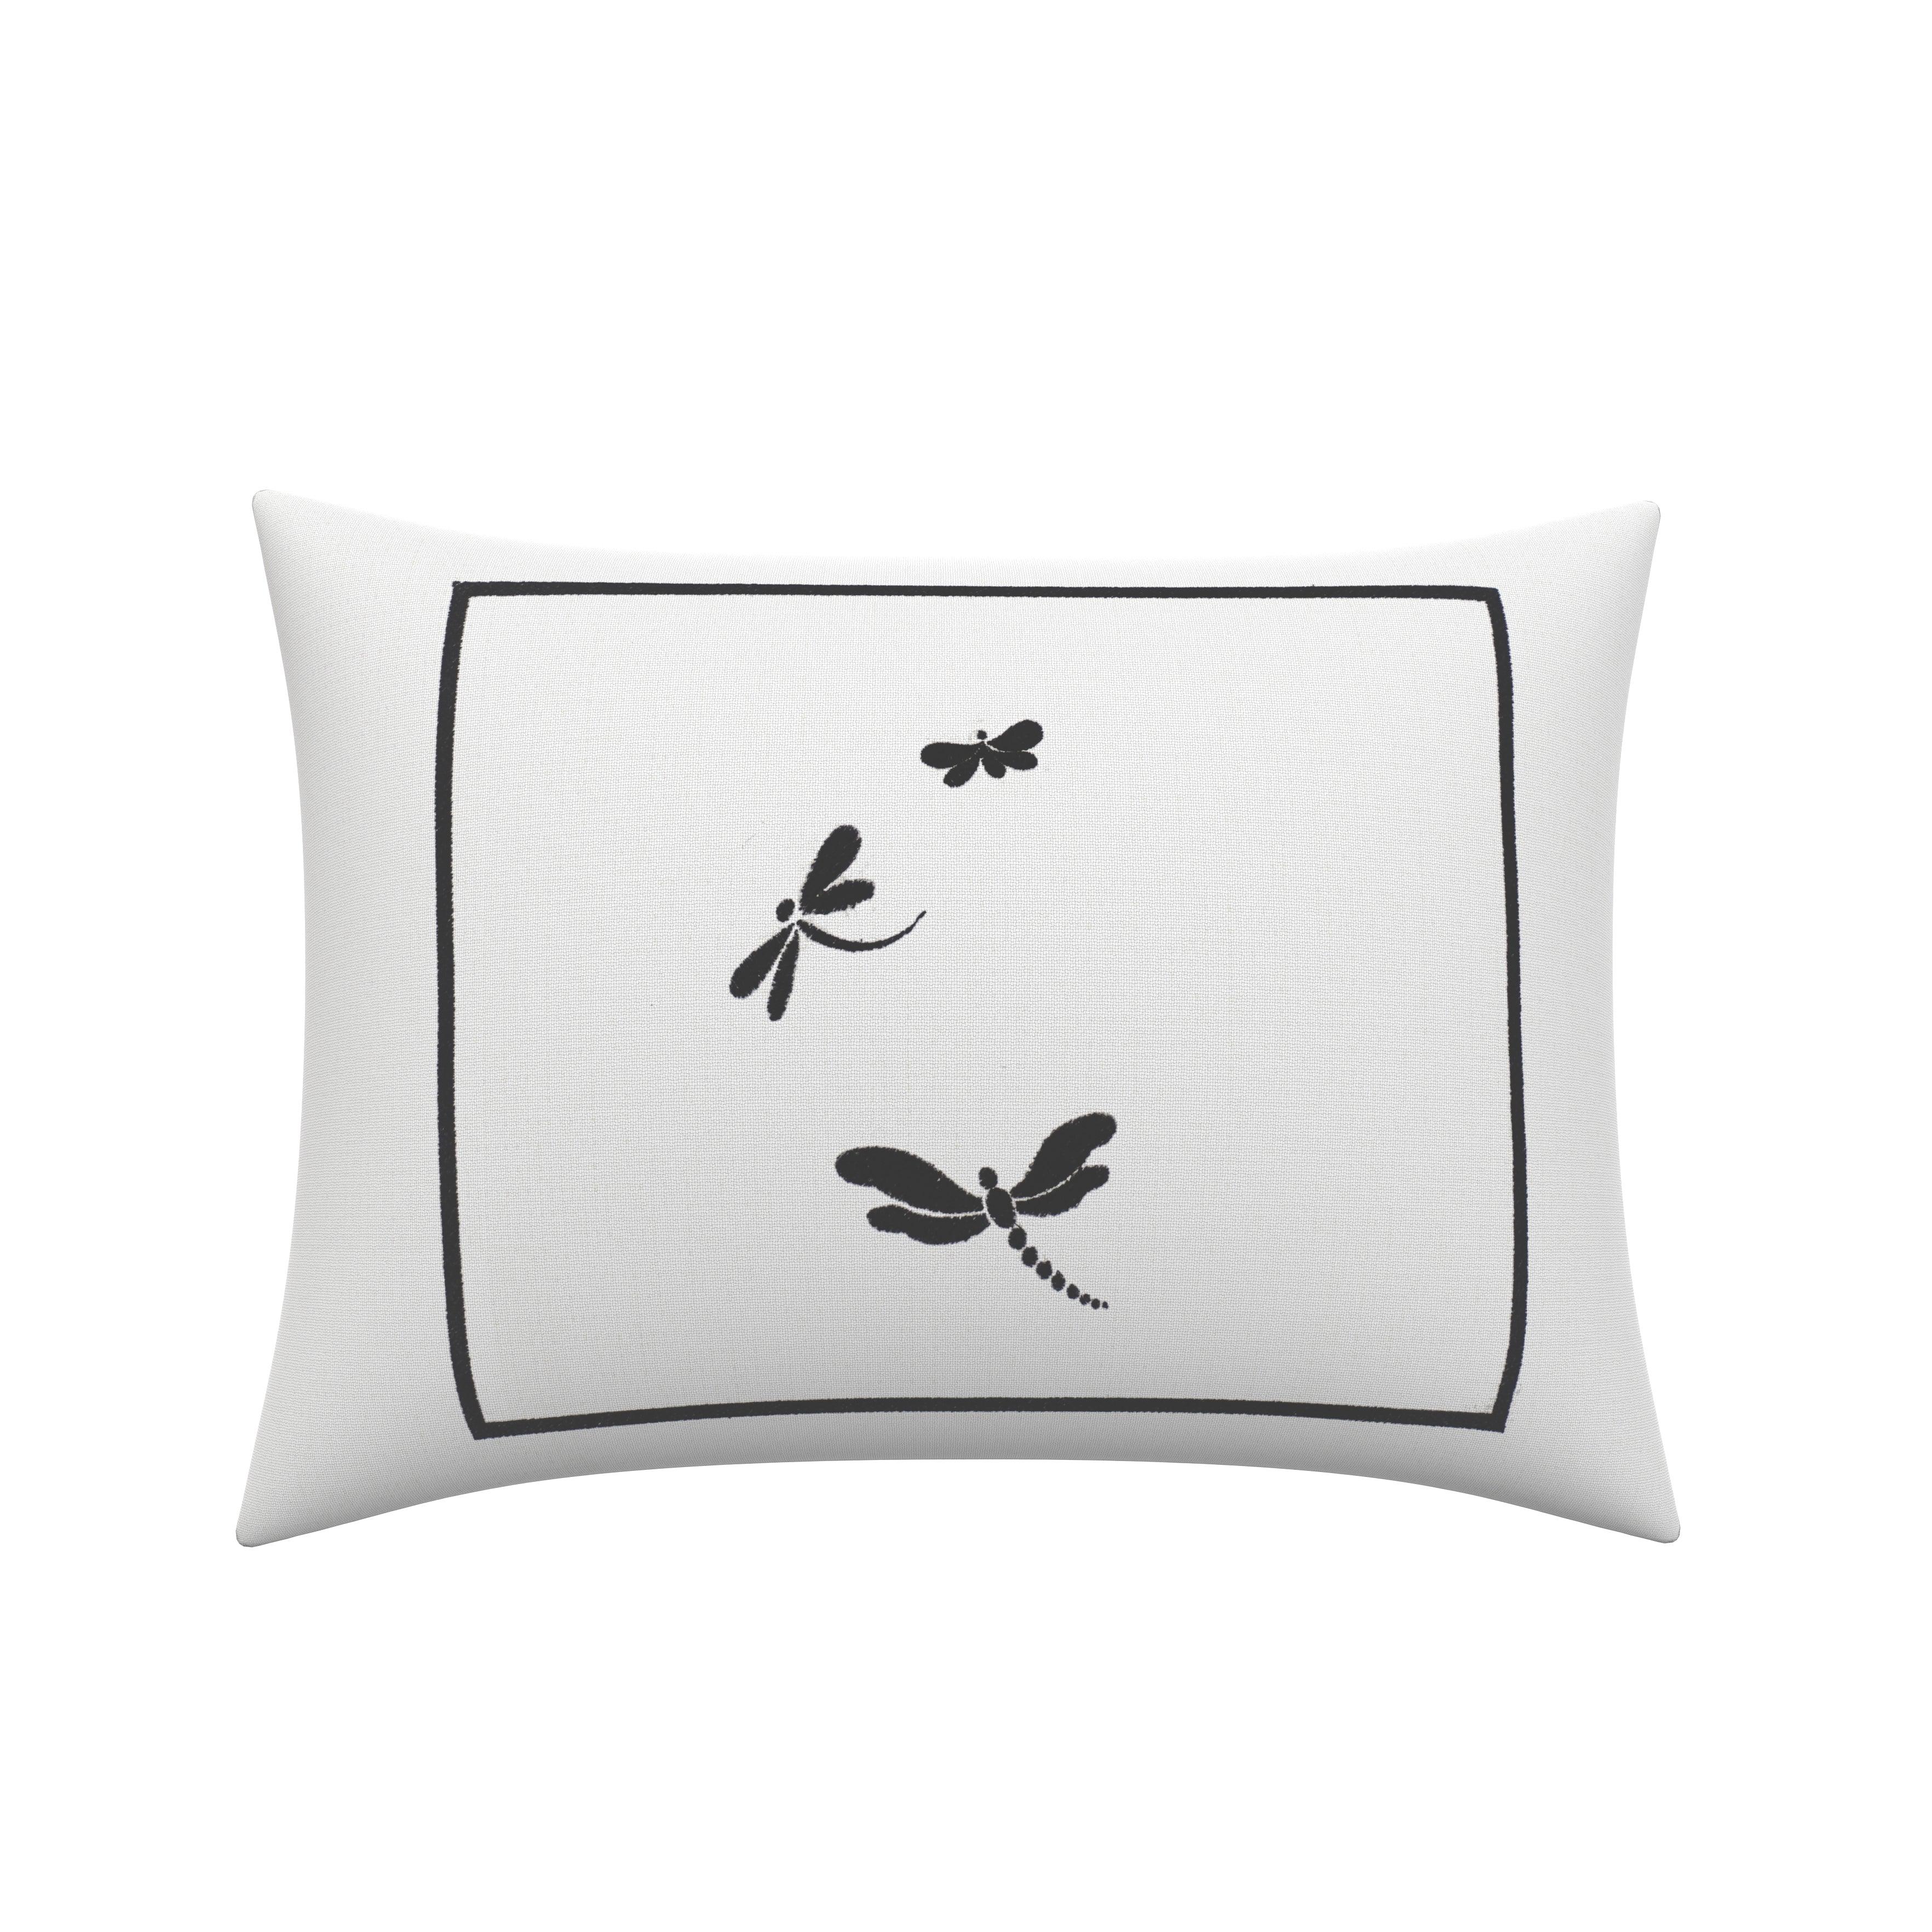 Embroidered Dragonfly Throw Pillow - Elegant Linen